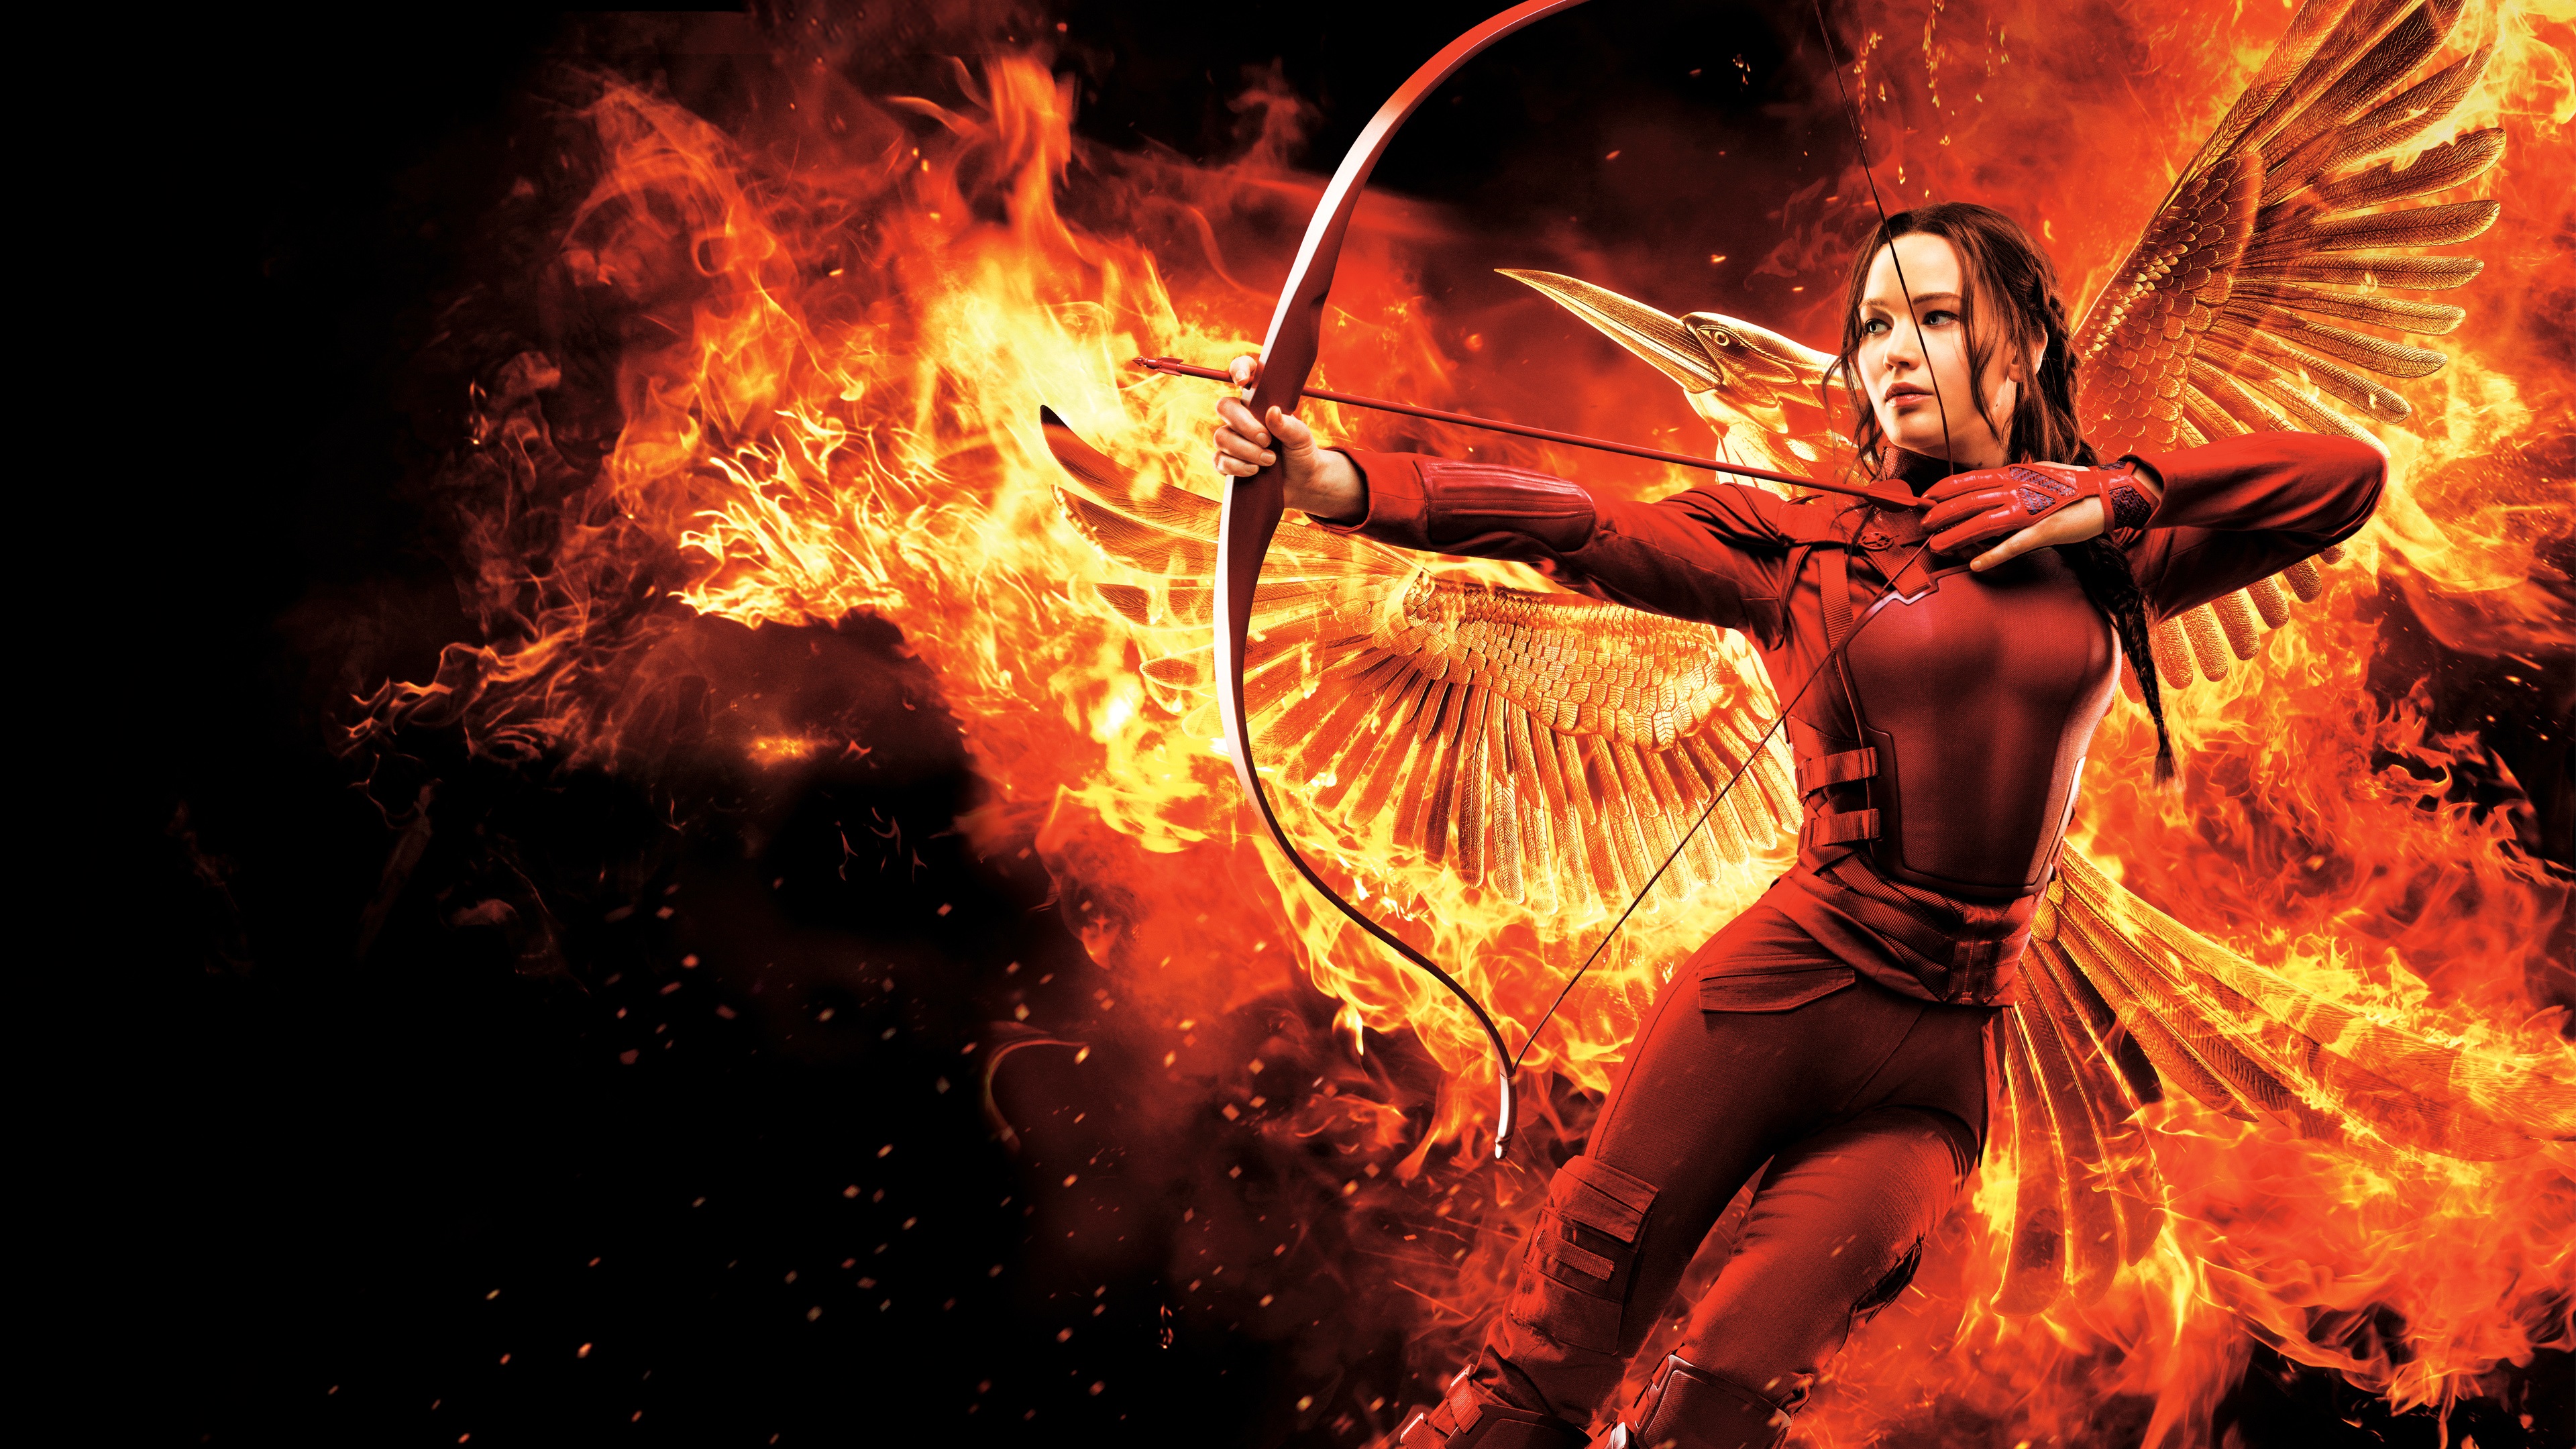 jennifer lawrence, movie, the hunger games: mockingjay part 2, bow, fire, flame, katniss everdeen, phoenix, wings, the hunger games